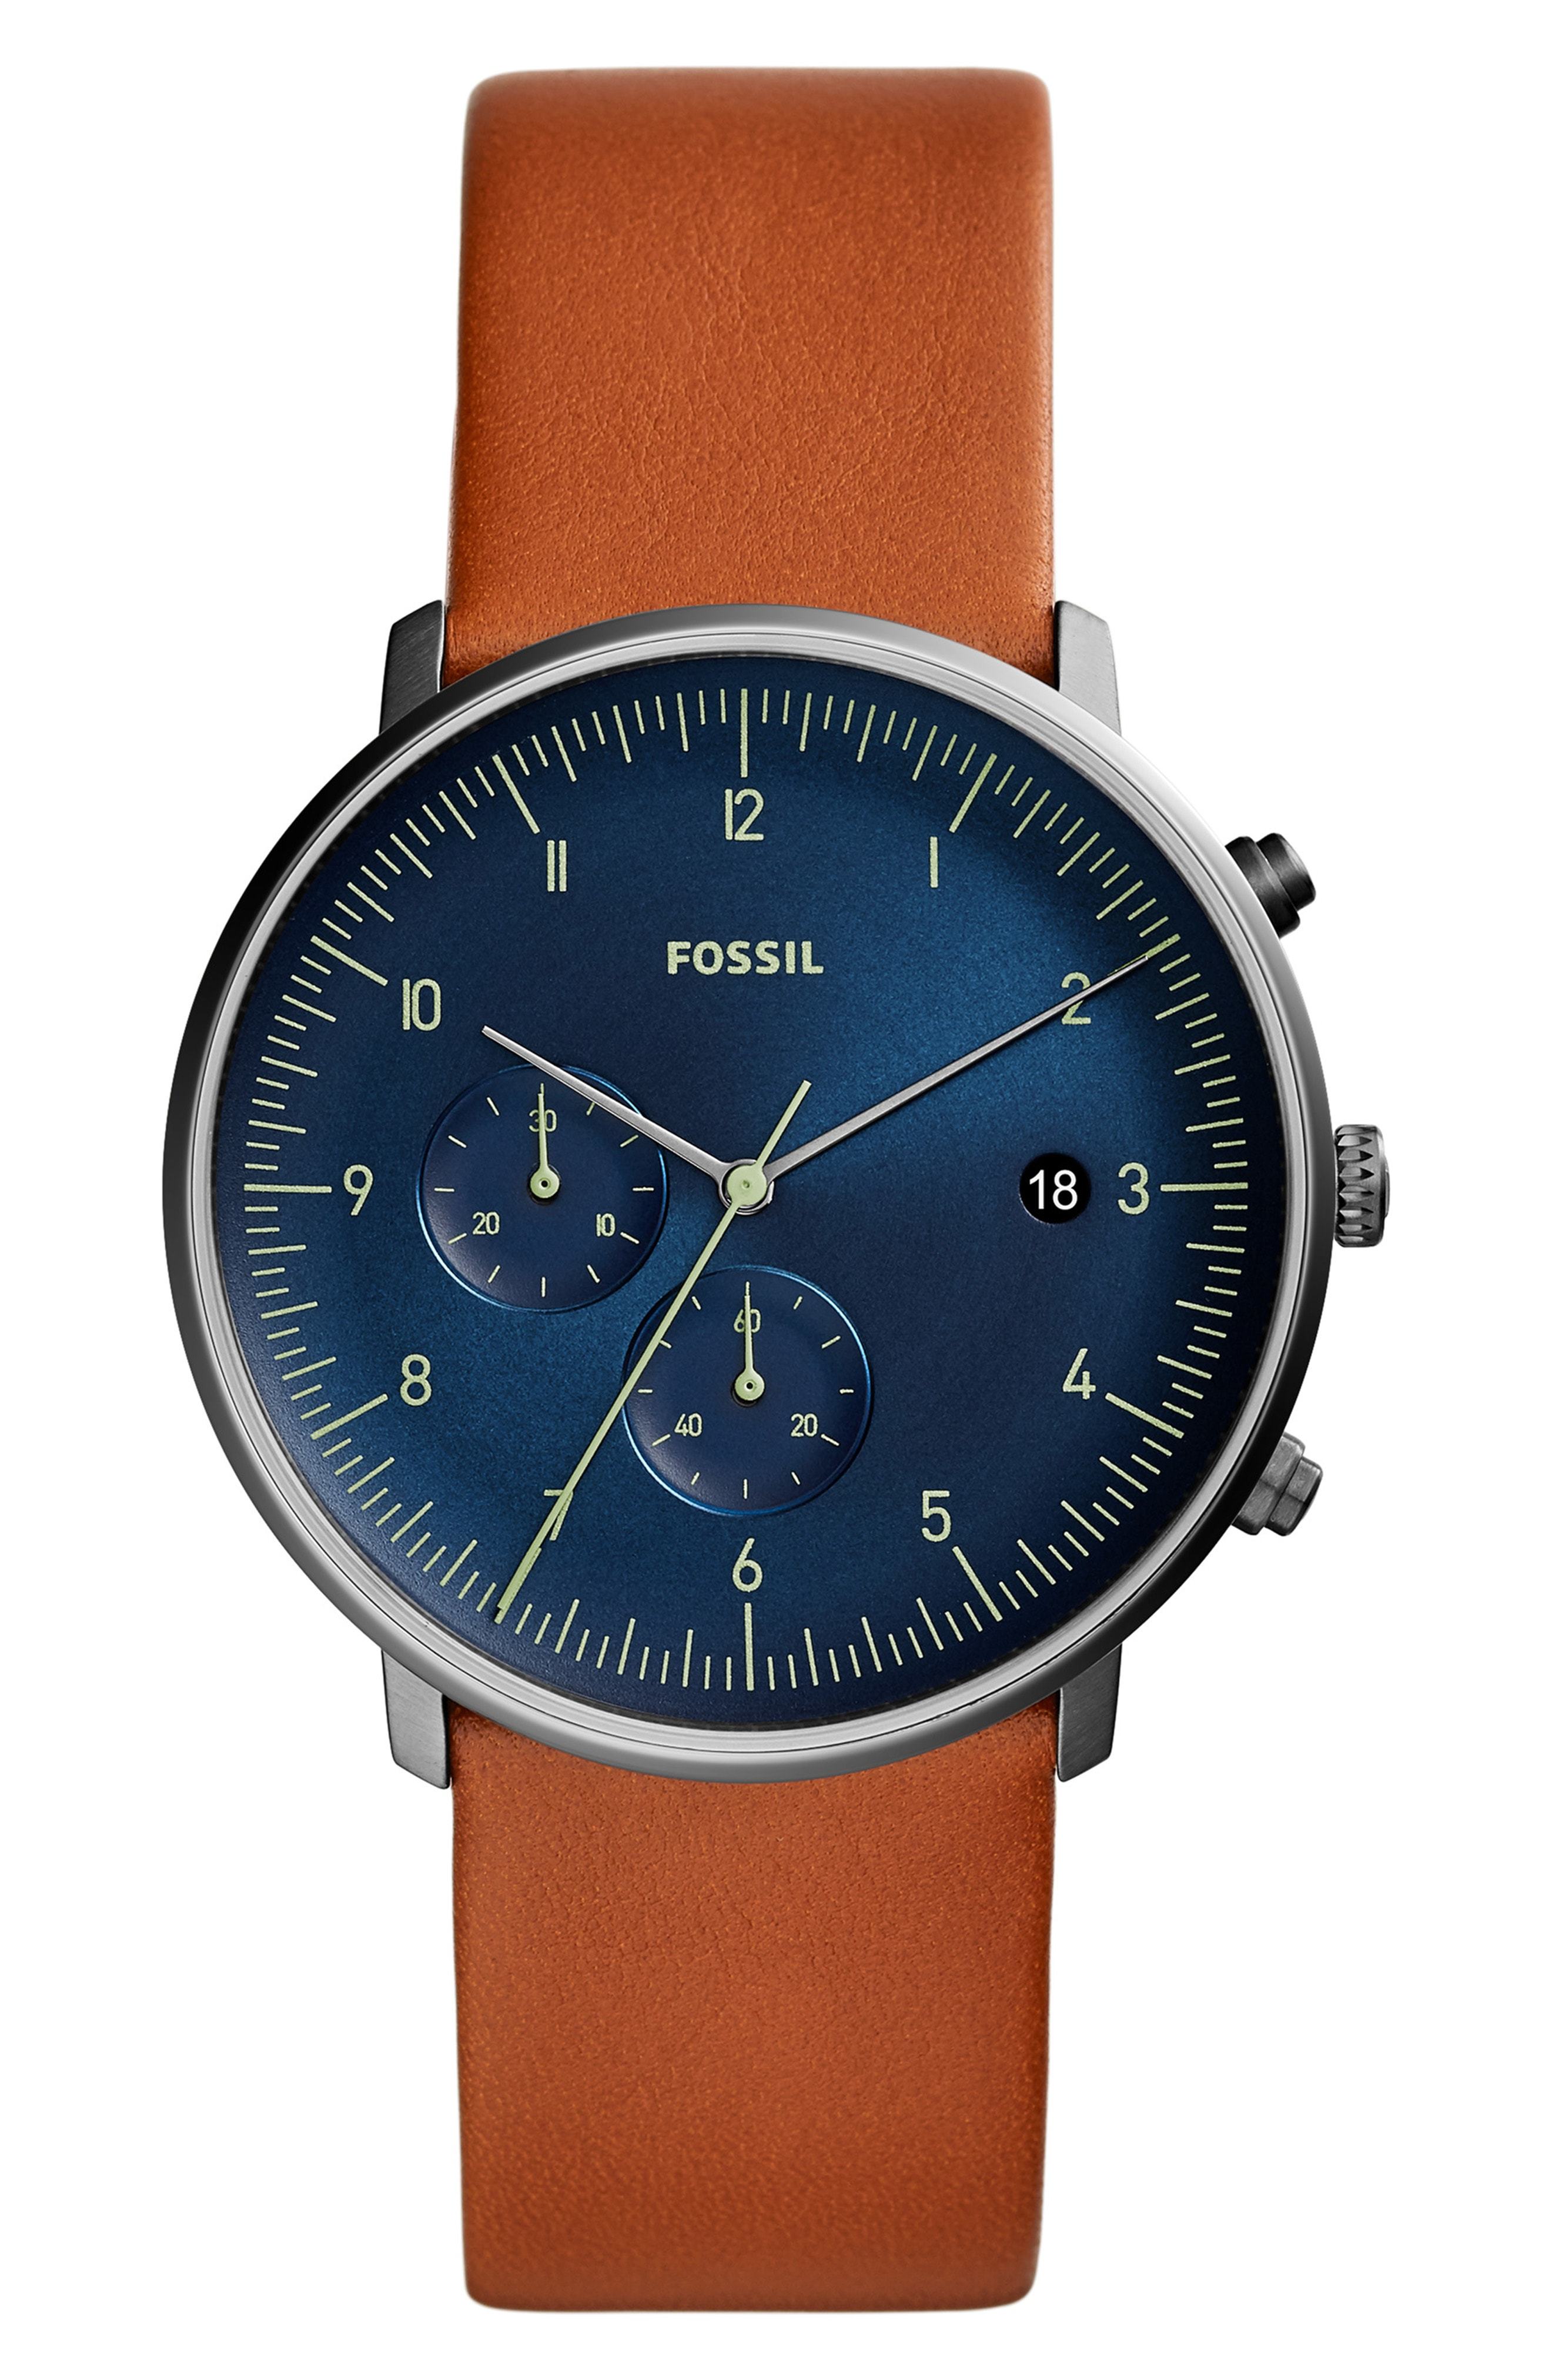 fossil chase timer chronograph Big sale - OFF 78%